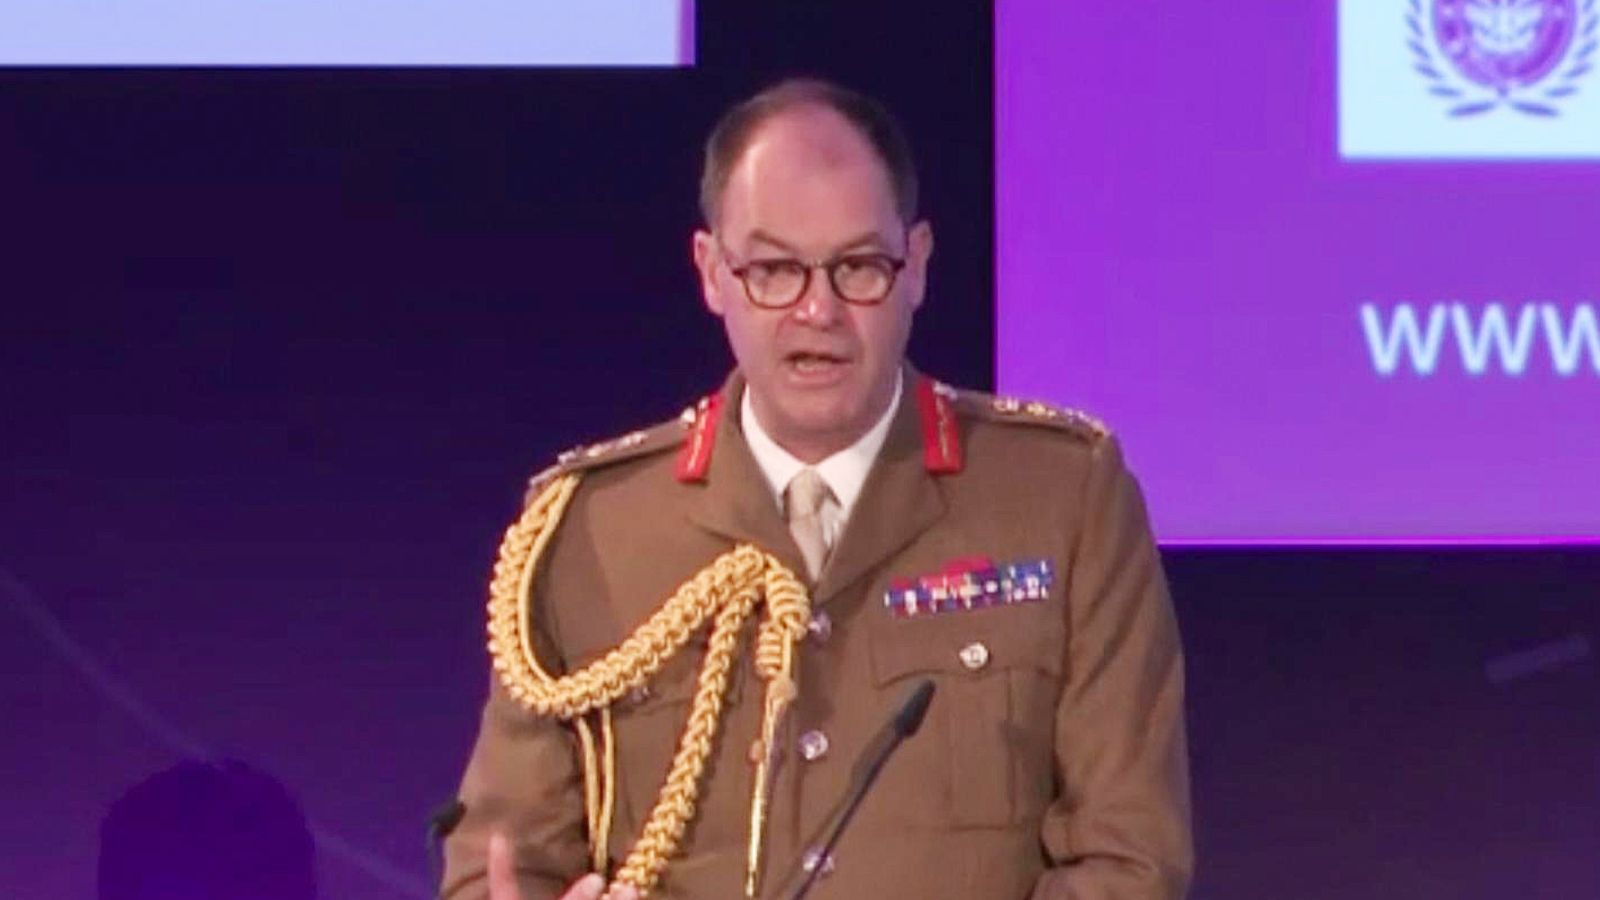 Head of the British army expected to step down next year after unusually short time at the helm